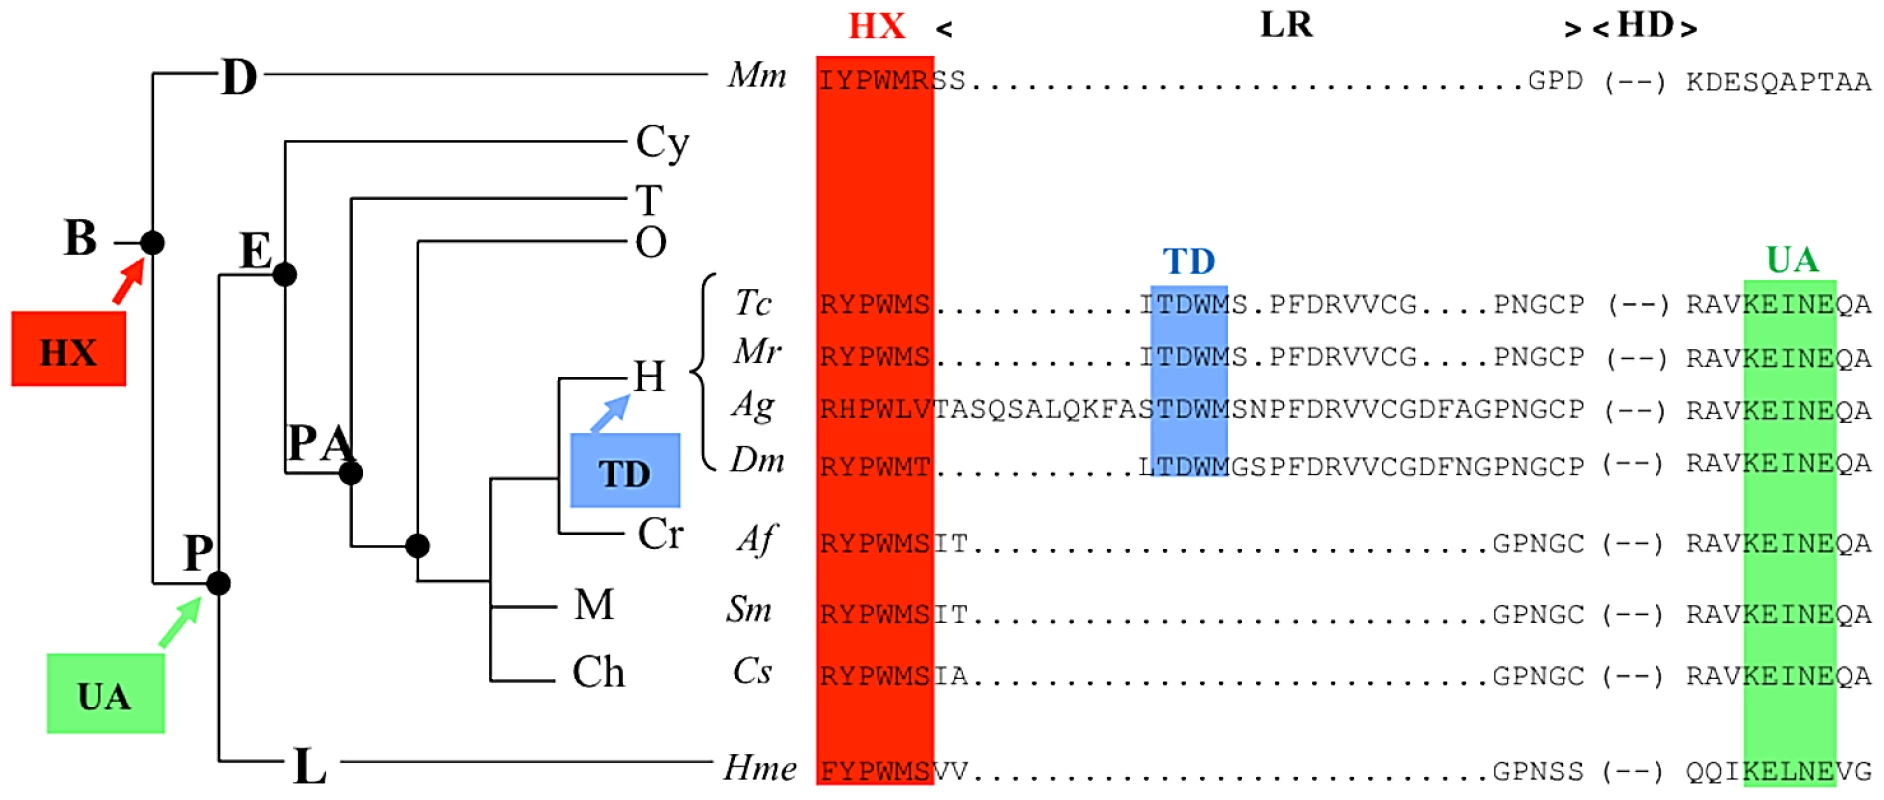 Phylogeny of the HX, TD, and UbdA protein domains.